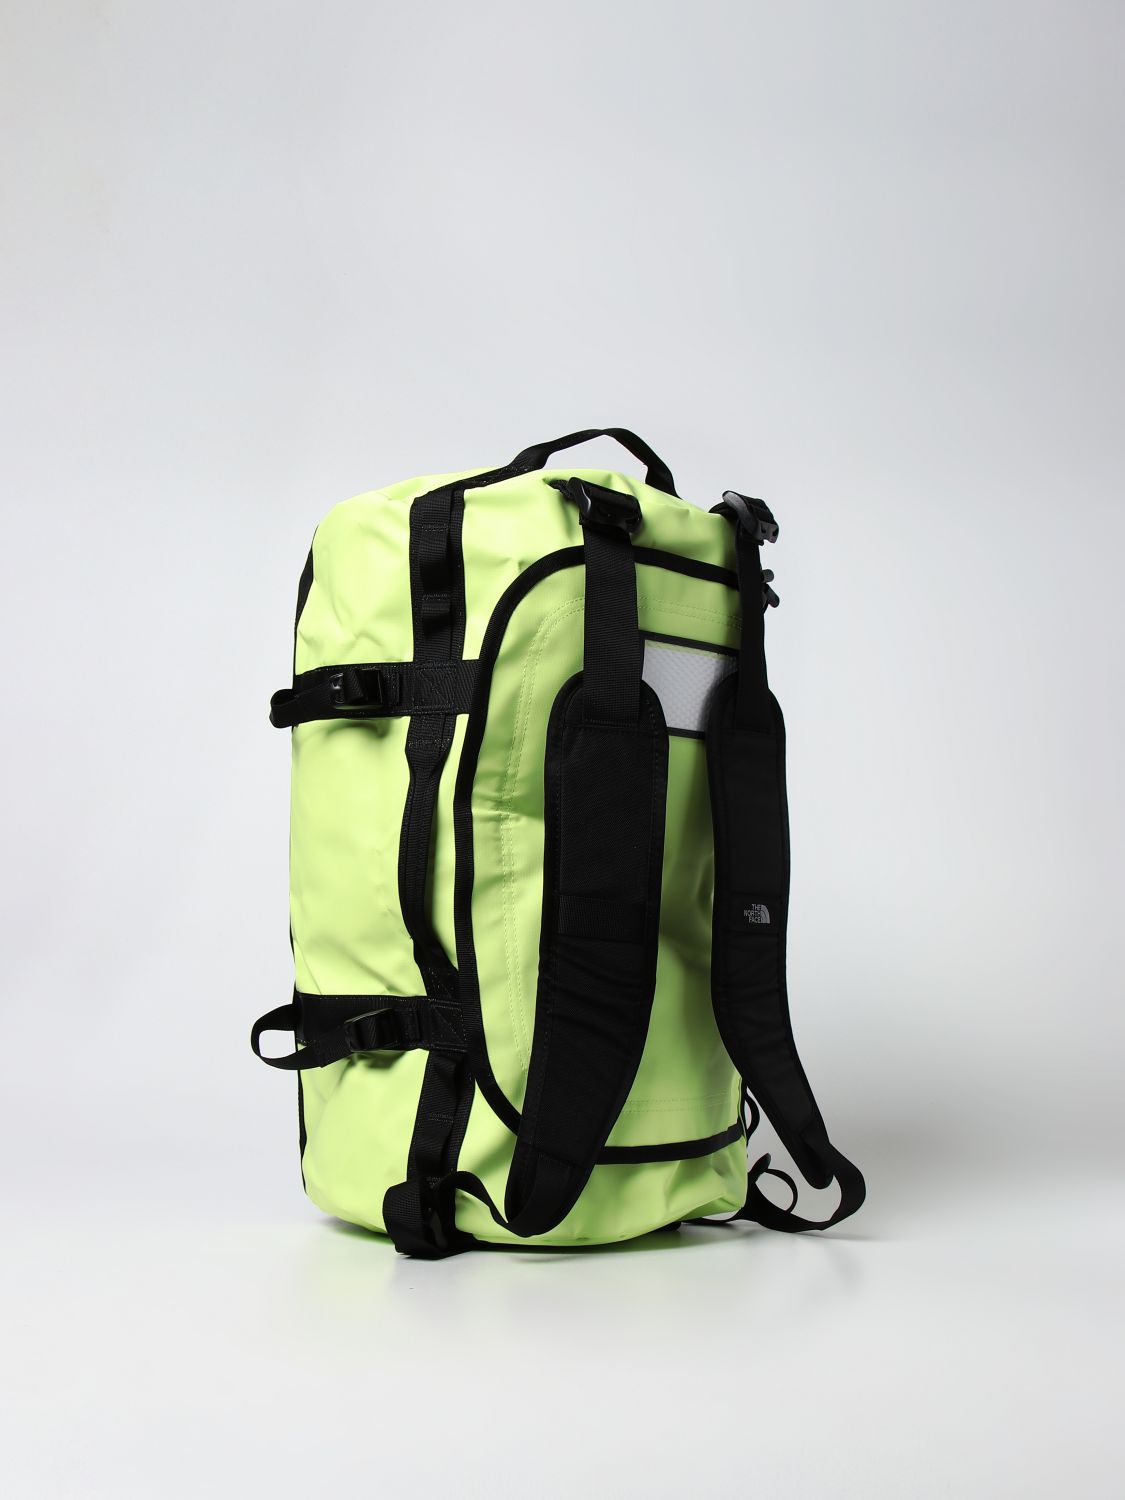 Backpack The North Face: The North Face Base Camp Duffel S backpack in technical fabric green 2